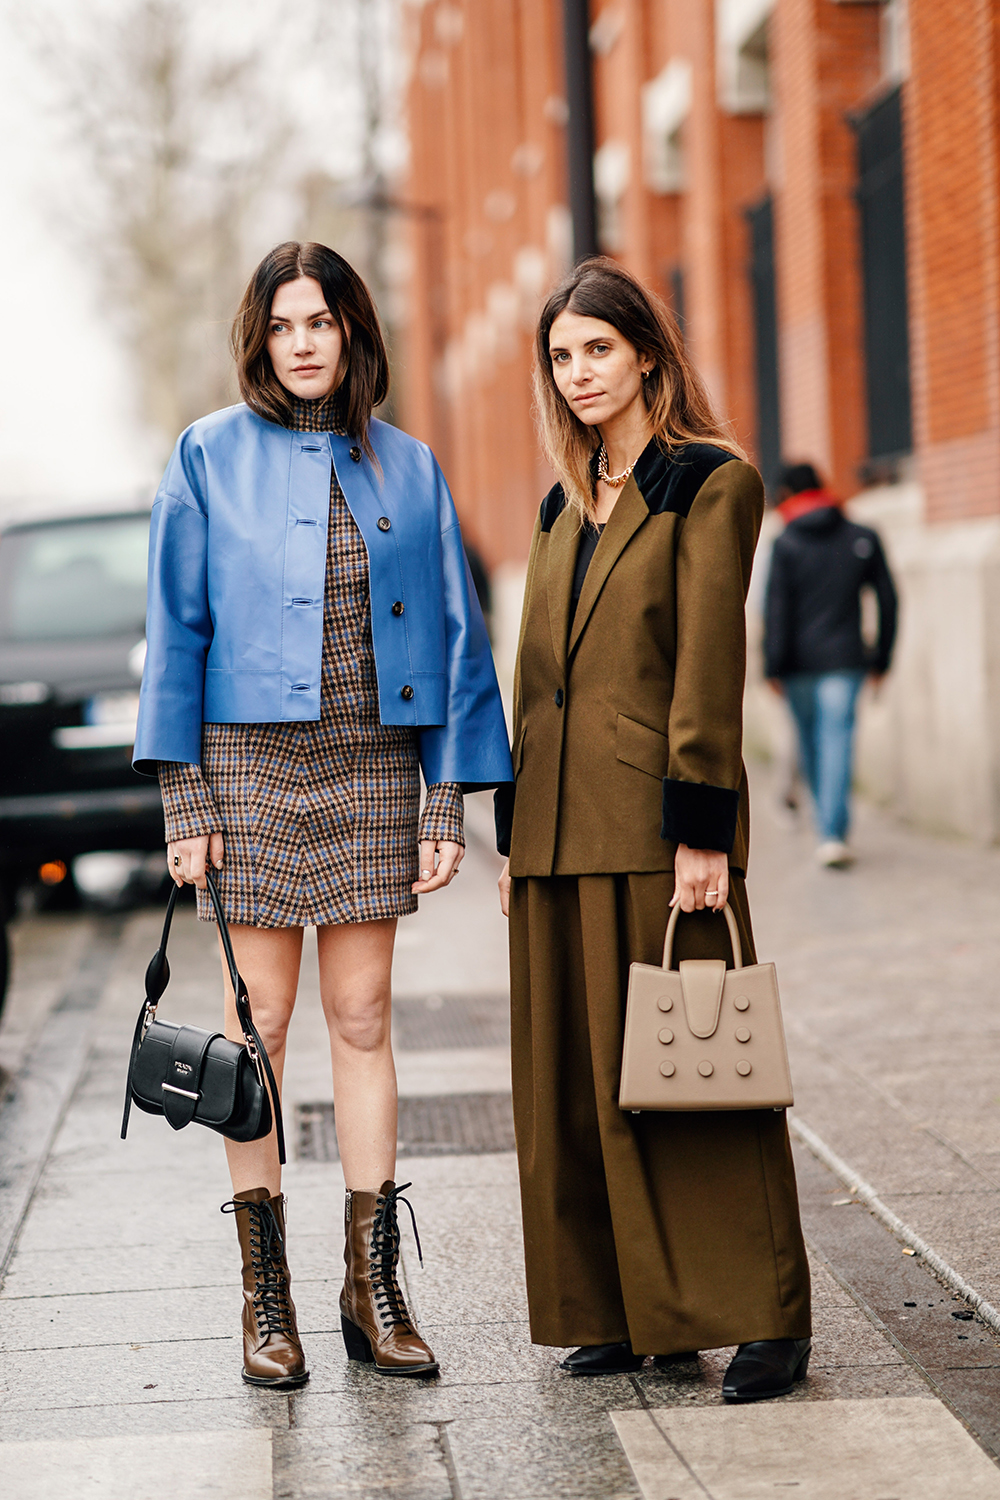 PARIS, FRANCE - MARCH 01: Madelynn Furlong (L) wears a turtleneck brown and blue tweed dress, a lavender-blue leather jacket, a black Prada bag, brown pointy lace-up boots ; Erika Boldrin (R) wears a golden necklace, a brown pantsuit with black velvet cuffs, black velvet insert at the shoulder, wide-leg pants, a beige bag,outside Nina Ricci, during Paris Fashion Week Womenswear Fall/Winter 2019/2020, on March 01, 2019 in Paris, France. (Photo by Edward Berthelot/Getty Images)